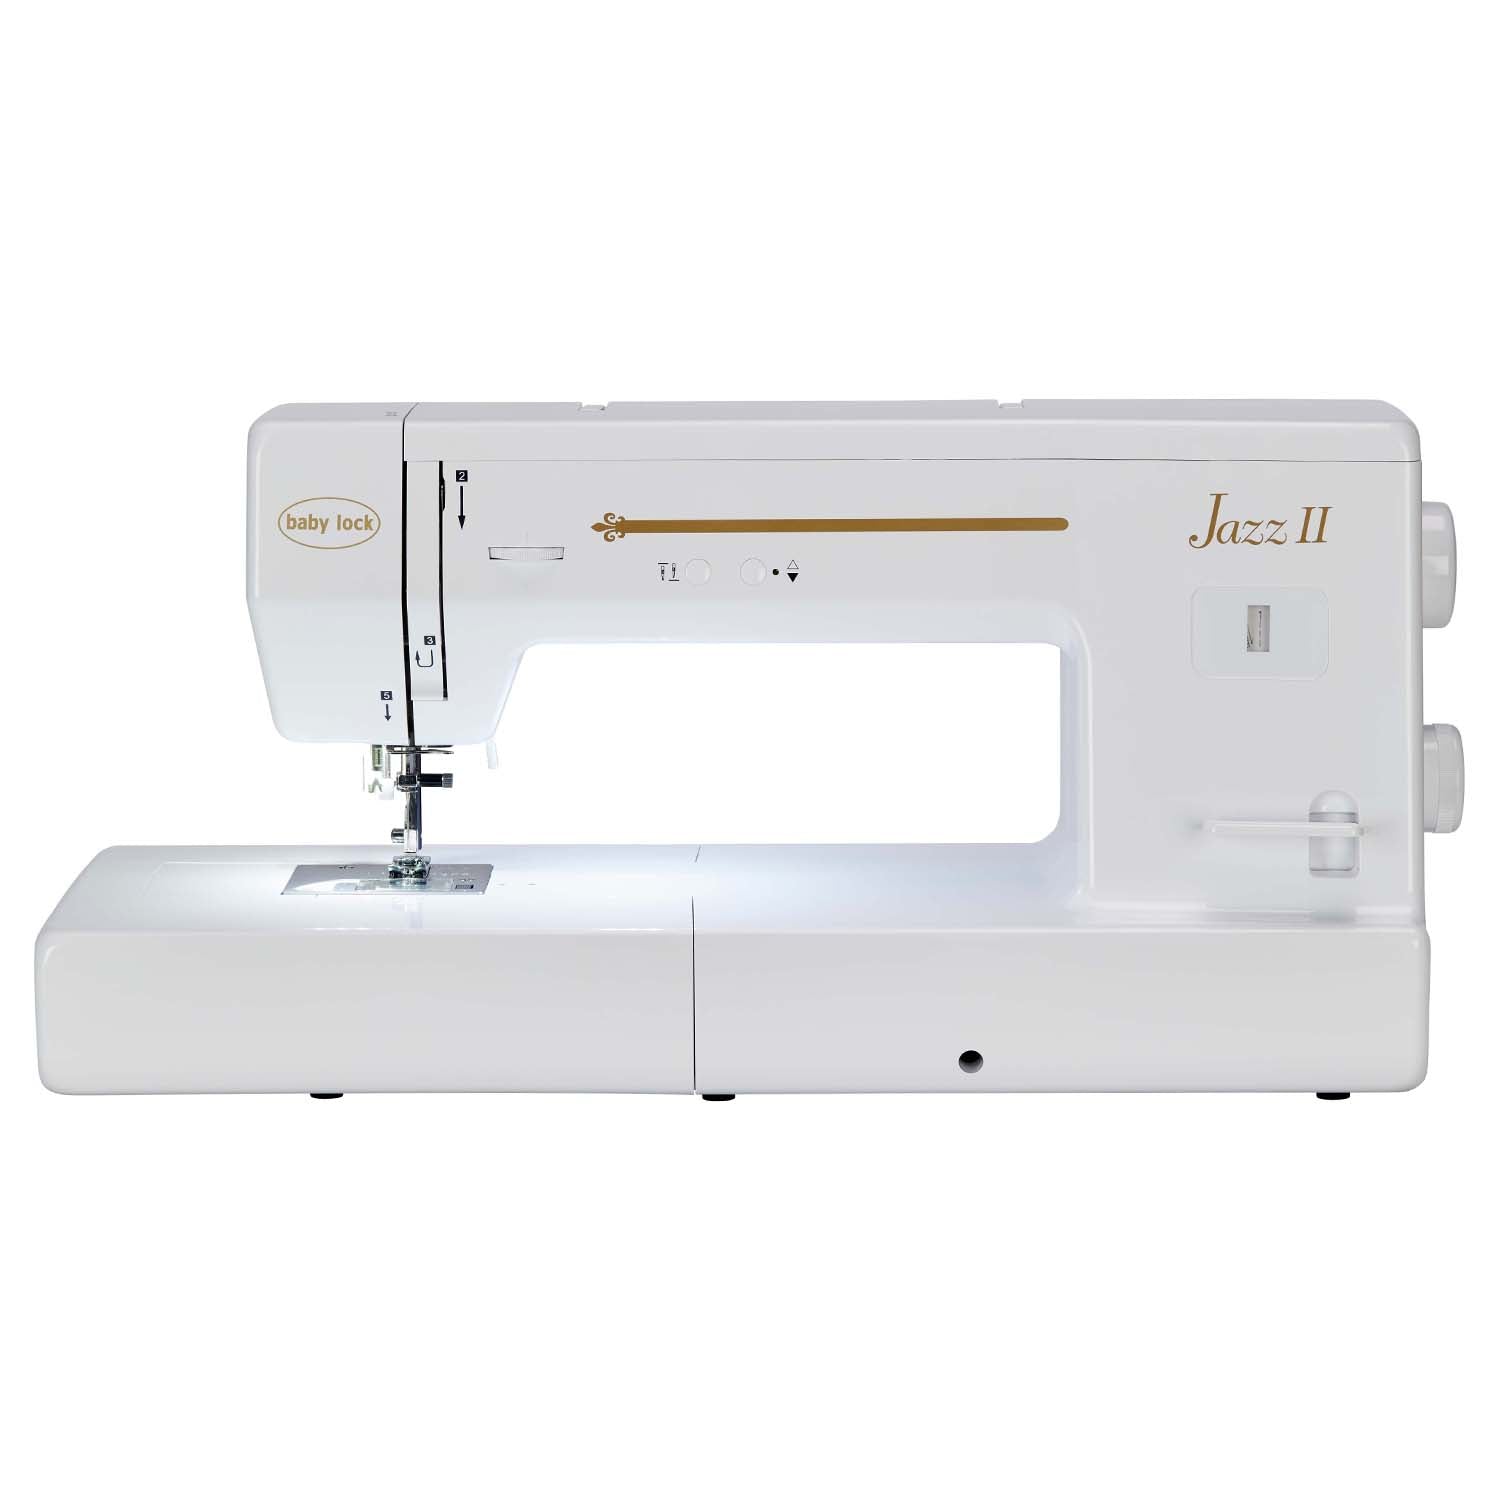 Baby Lock Jazz II Sewing and Quilting Machine BLMJZ-2 — Quilt